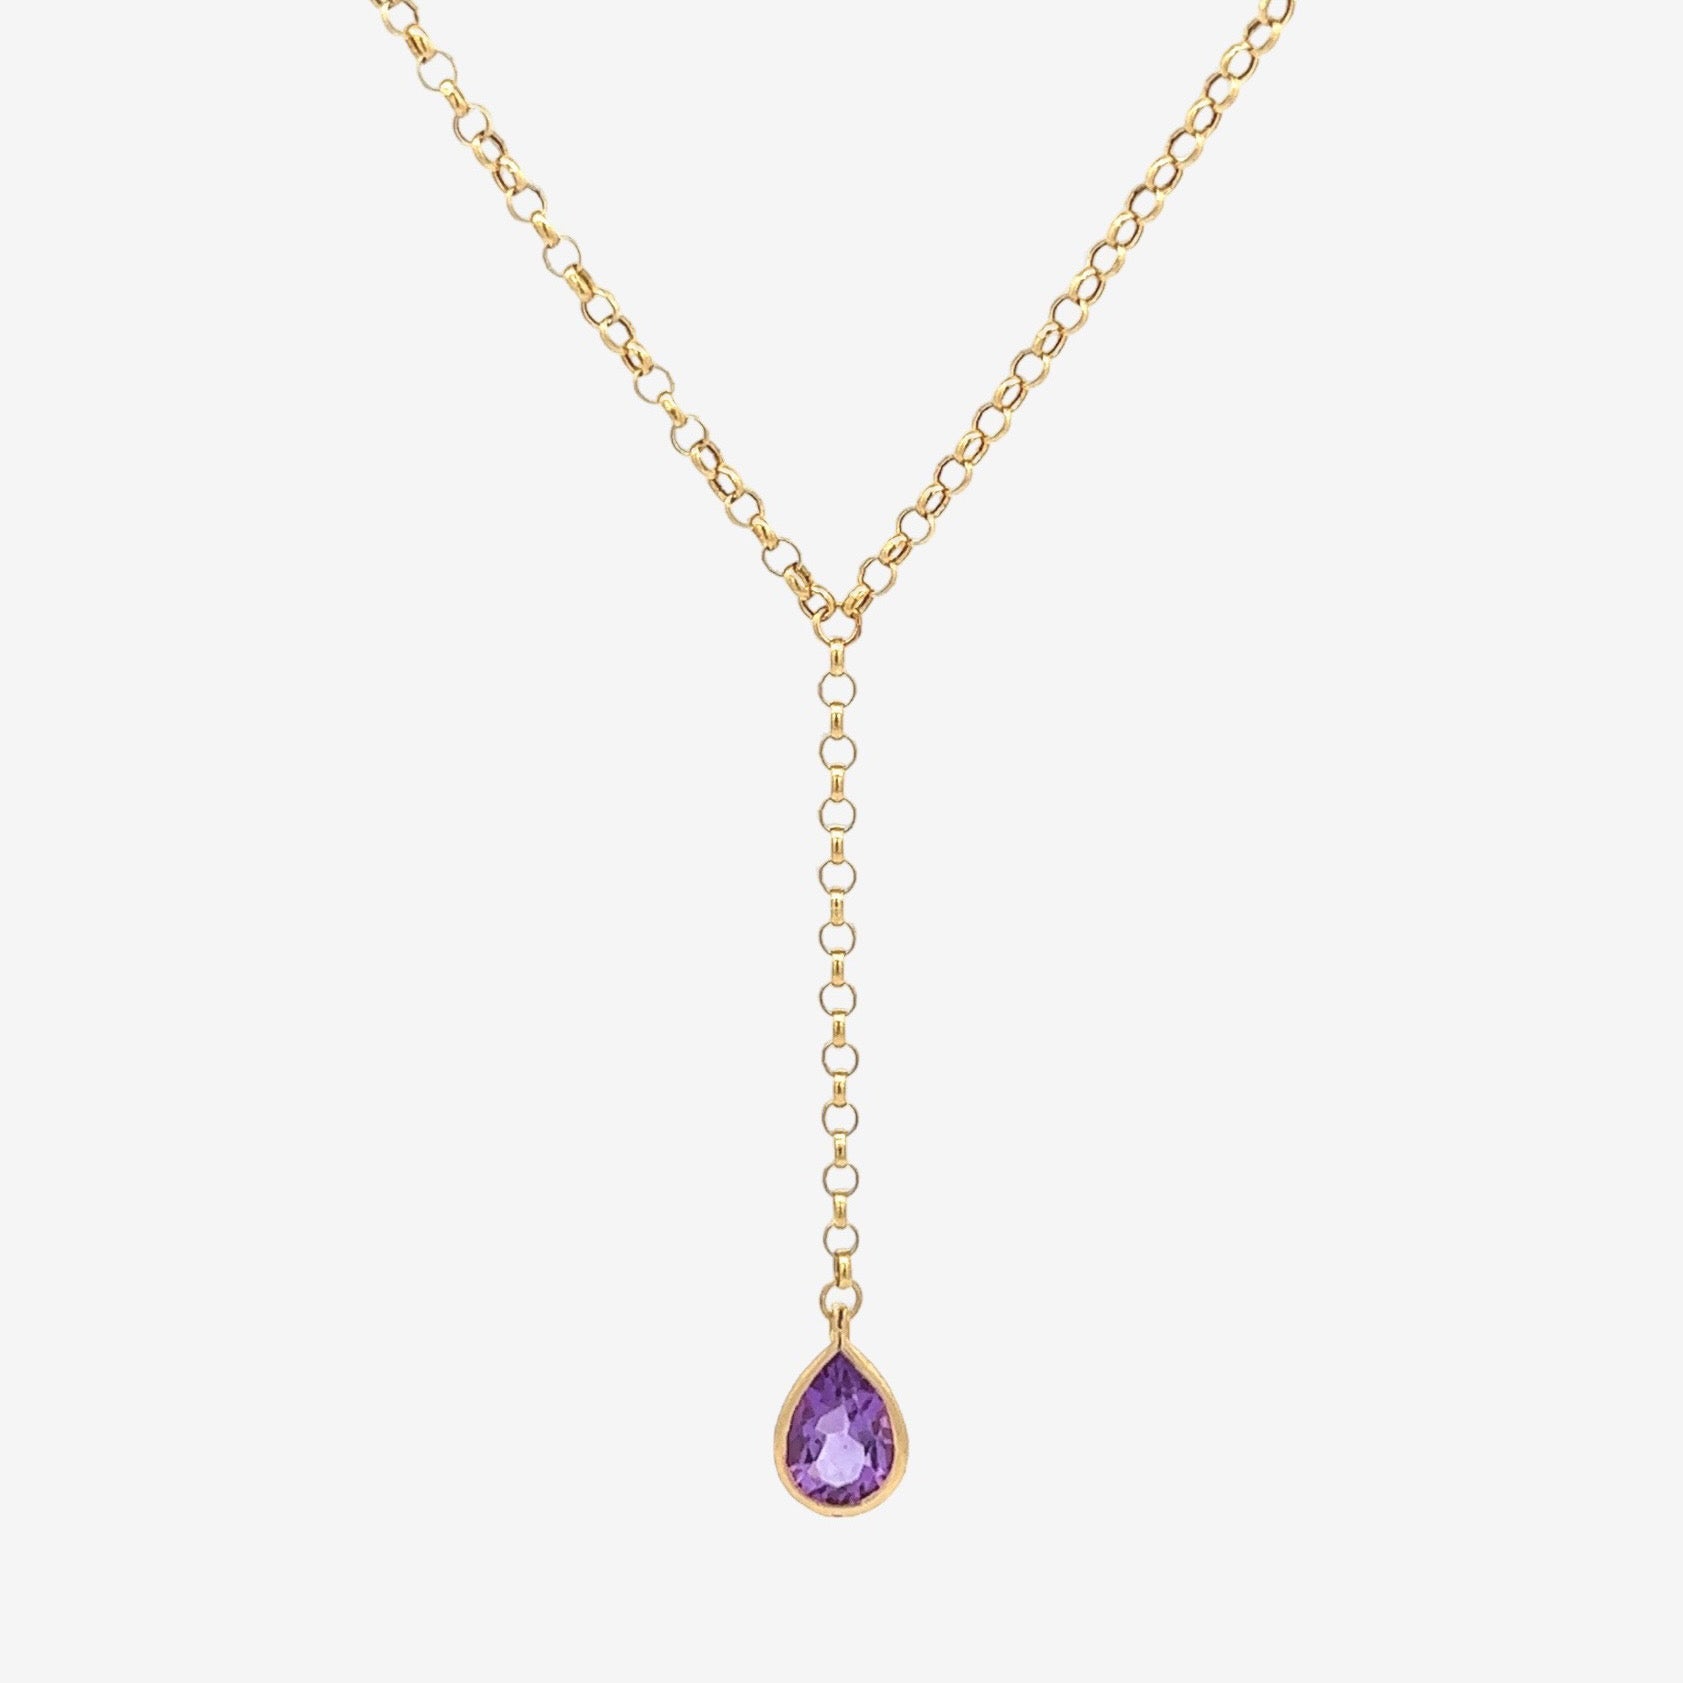 Louise Necklace in Amethyst - 18k Gold - Lynor